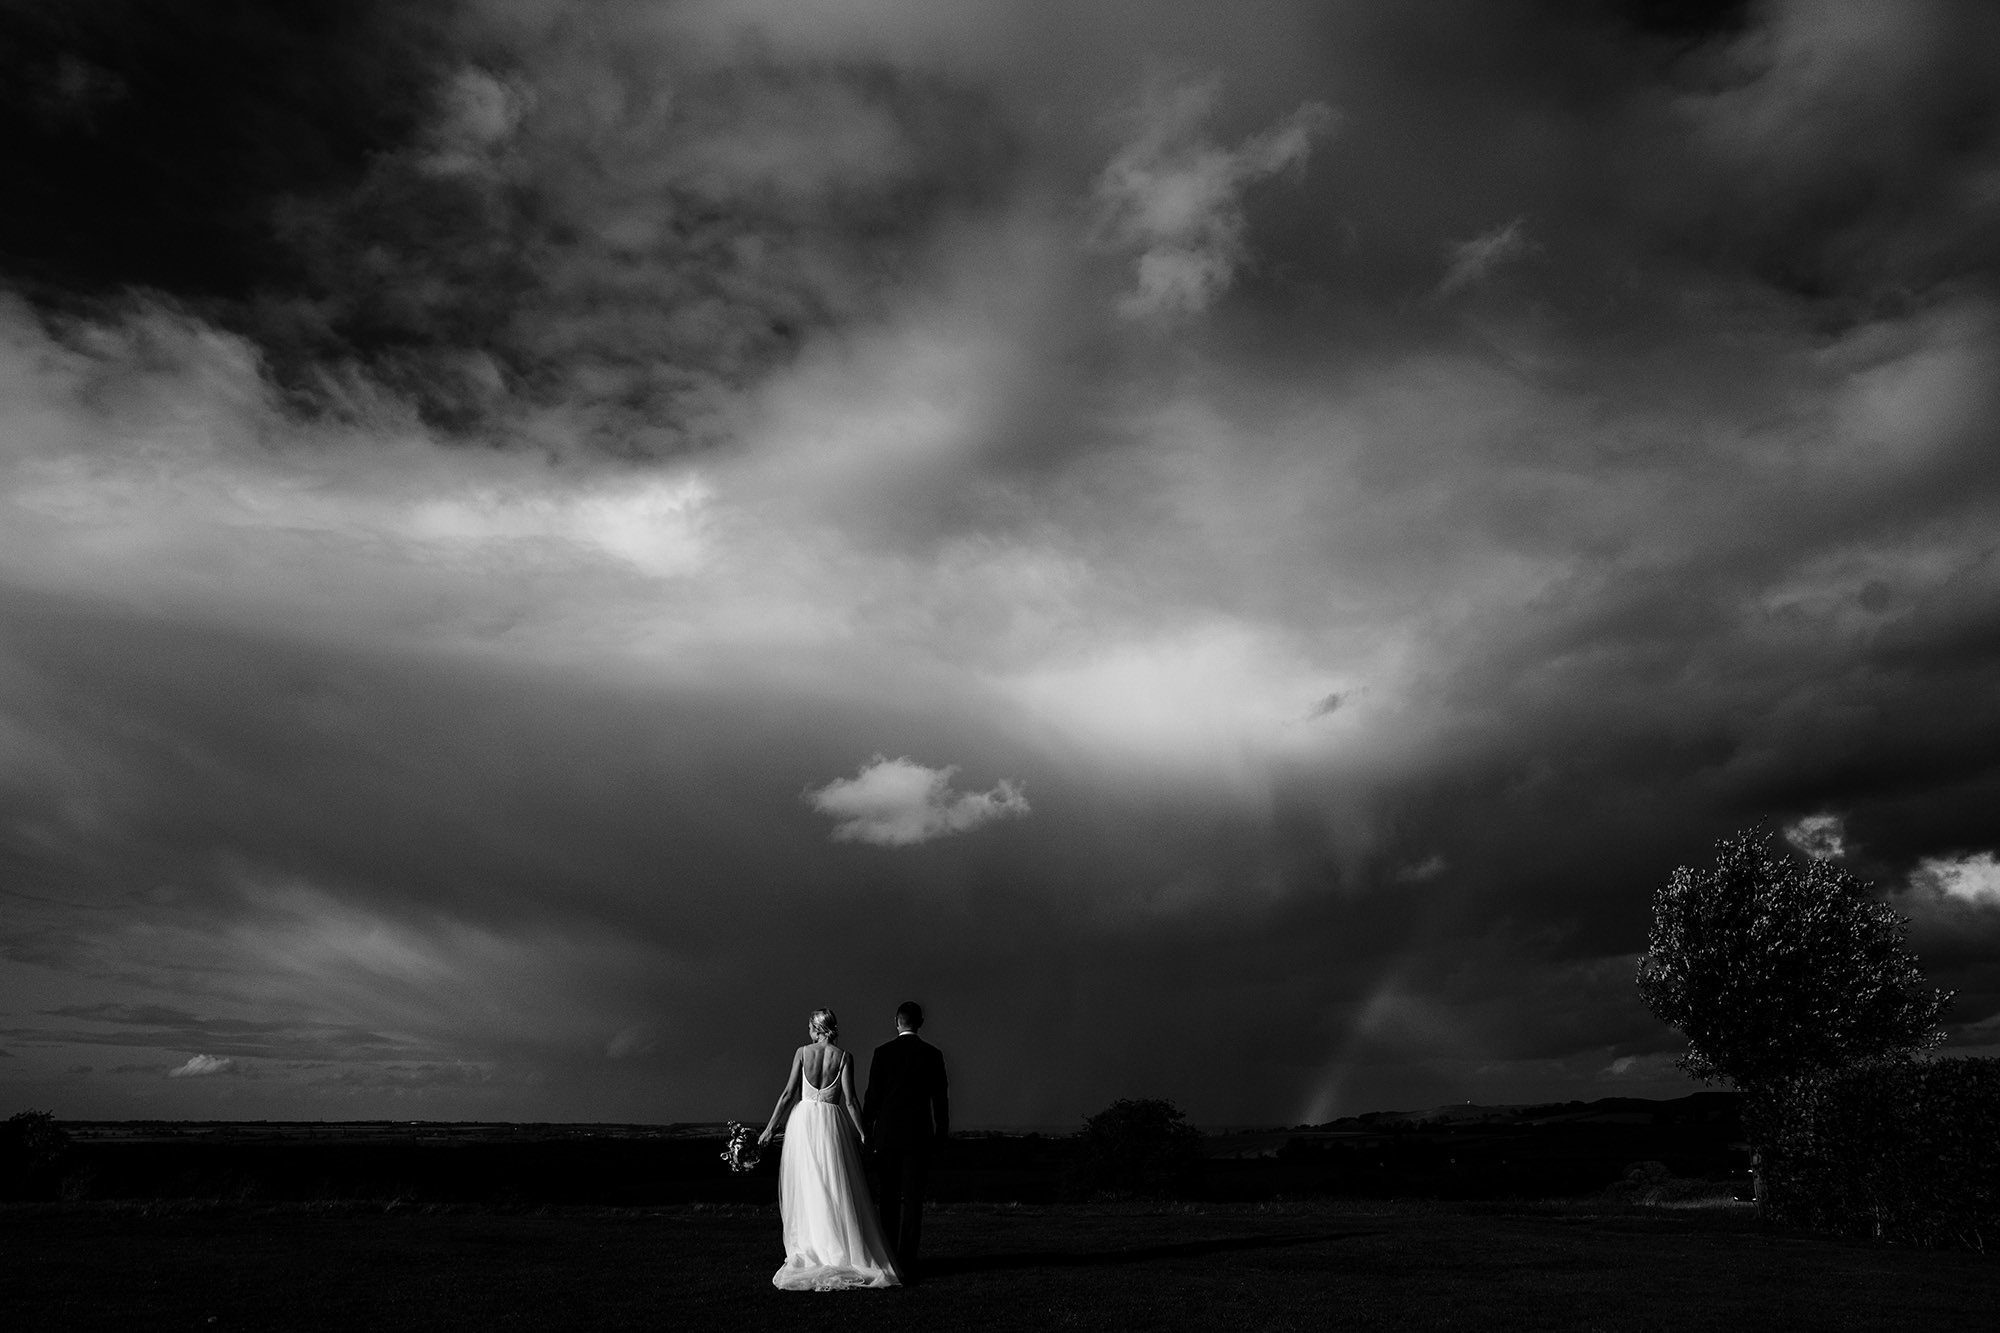 bride and groom walking towards a storm in black and white scene